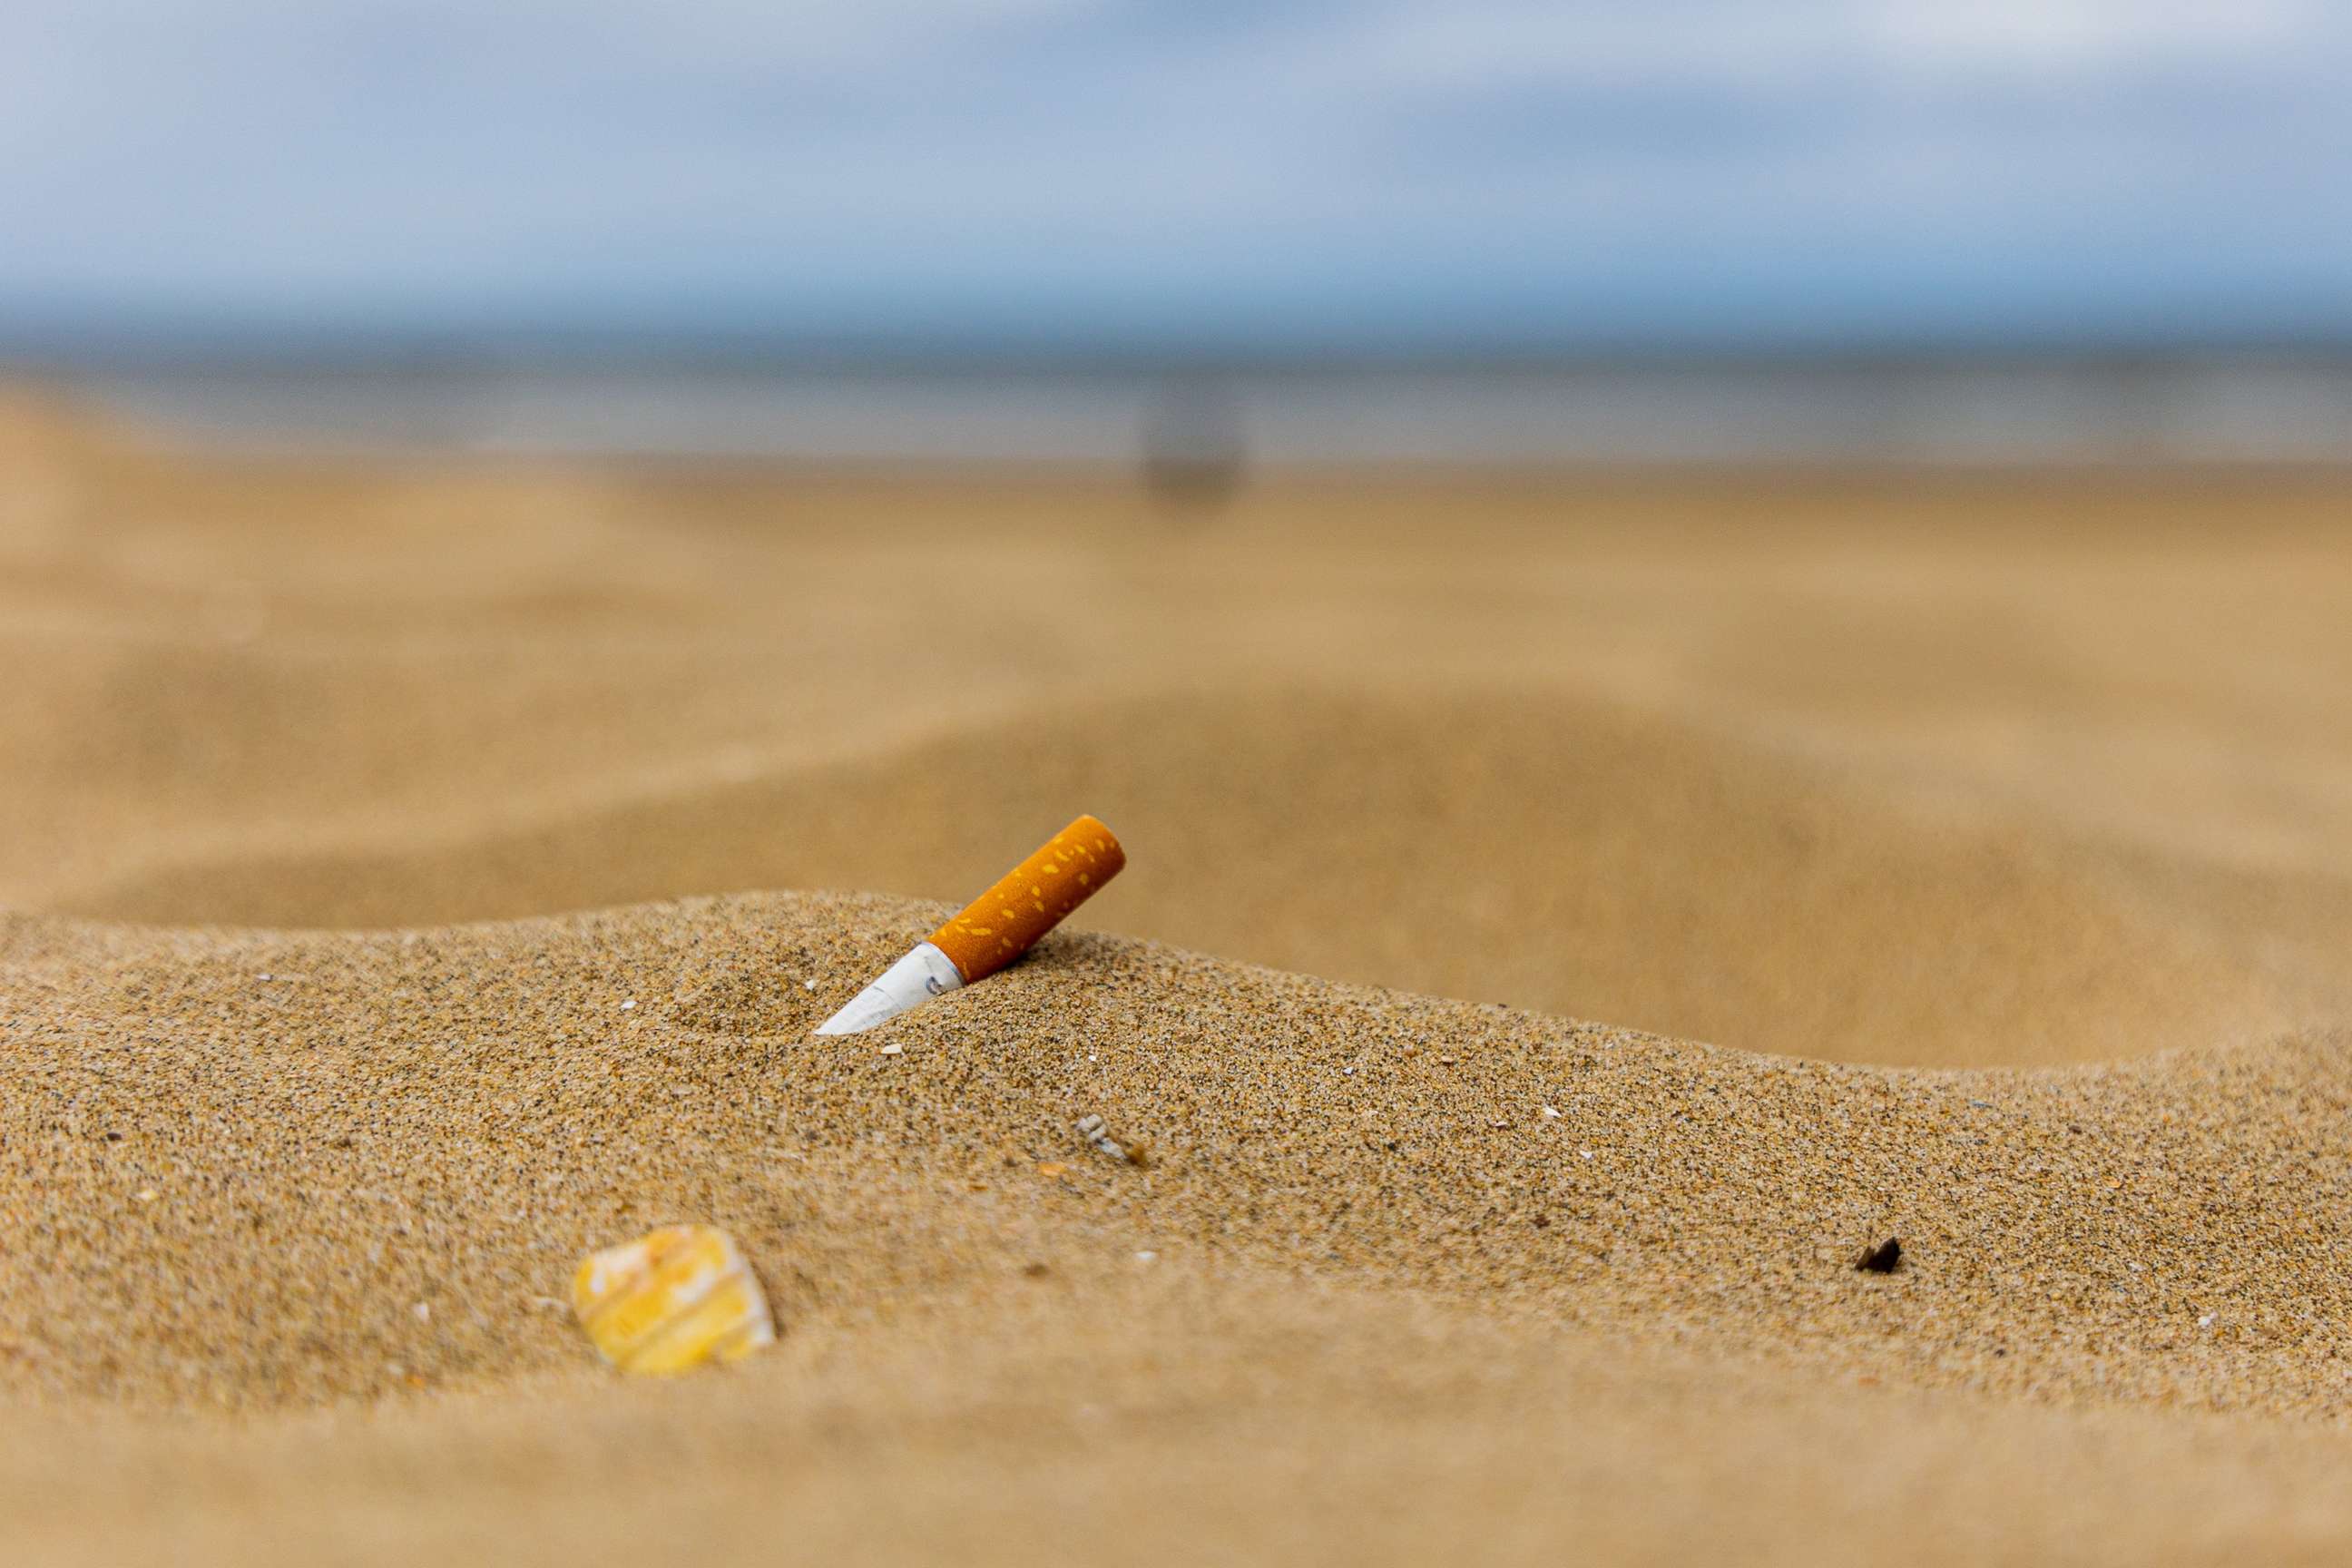 PHOTO: In this undated stock photo, a cigarette butt is shown in the sand on a beach.